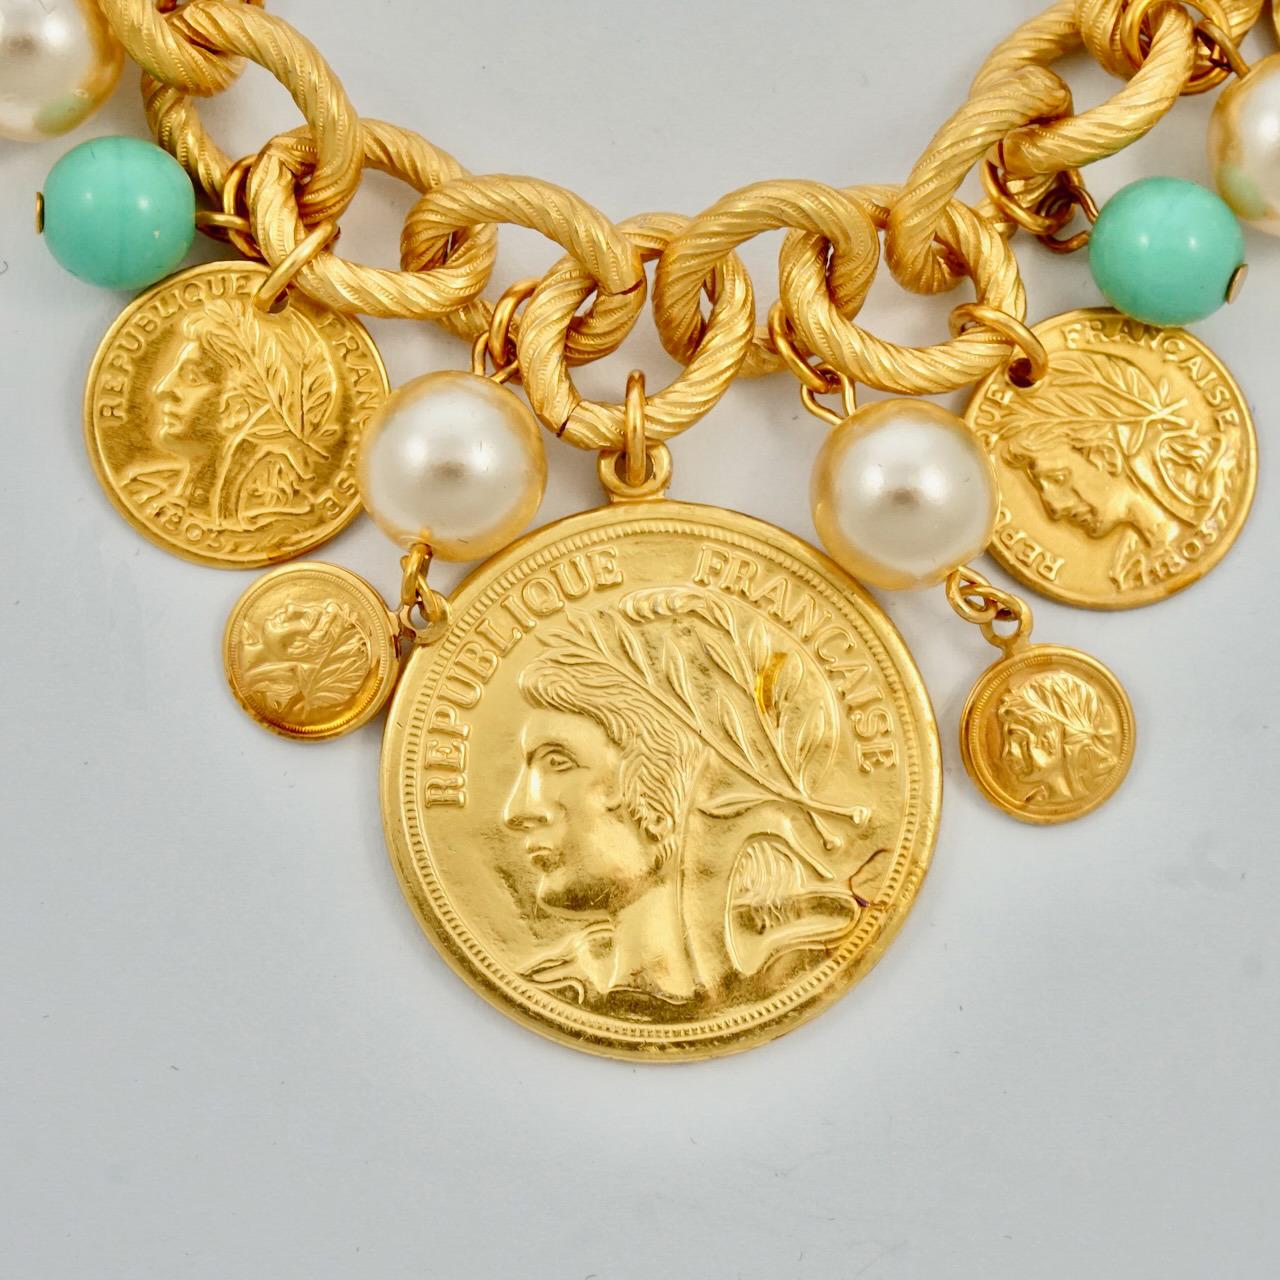 Fabulous Miriam Haskell Russian gold plated charm bracelet, with faux pearls and turquoise glass, and featuring Greek and French decorative coins. Measuring length 20.3 cm / 8 inches, and the largest coin is diameter 2.9 cm / 1.14 inch. The bracelet